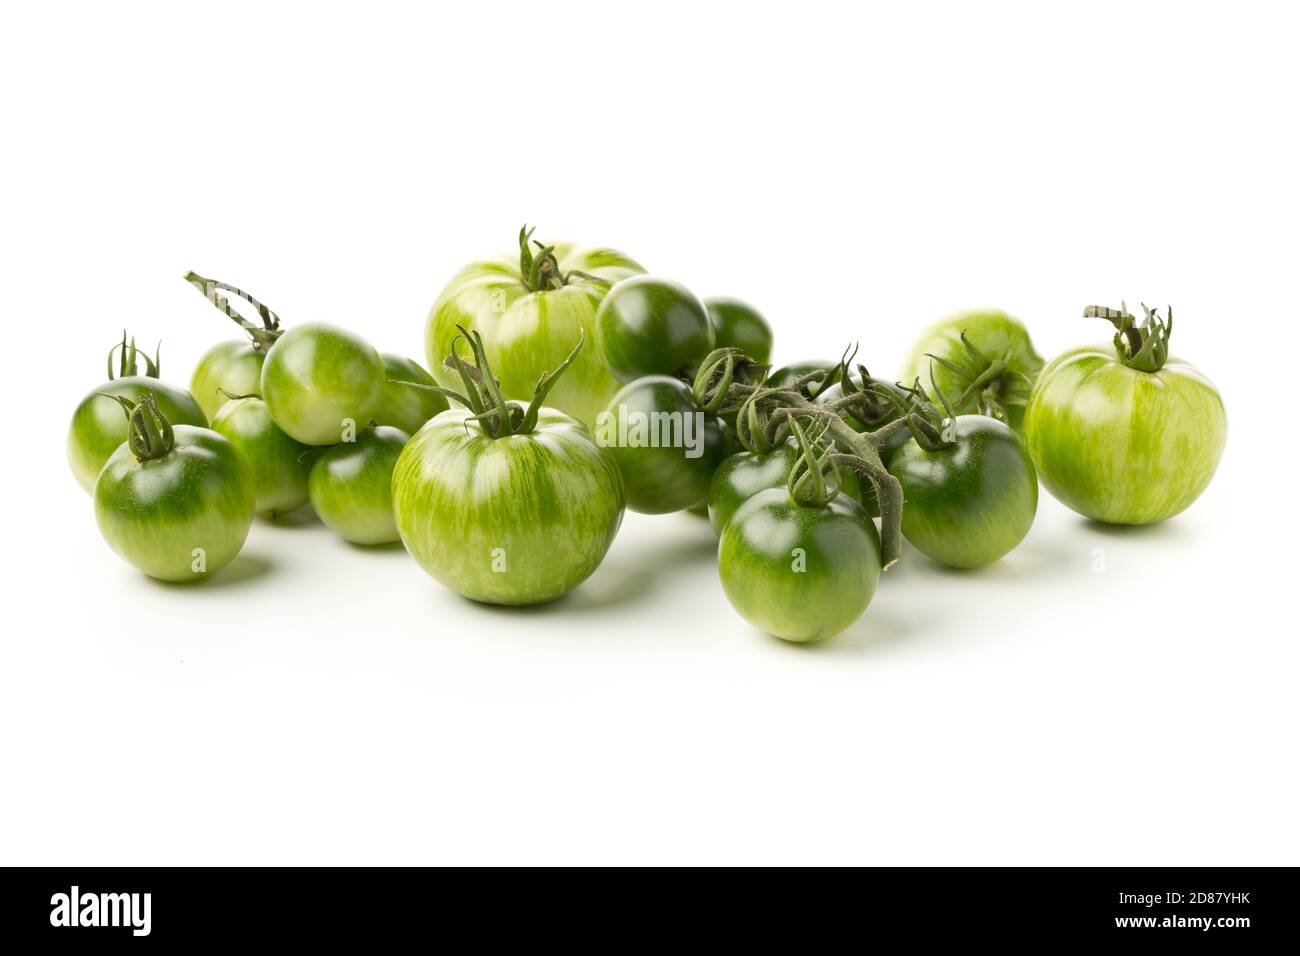 Heap of unripe green tomatoes over white background, unripe tomatoes can be fried or used for relish, selective focus Stock Photo